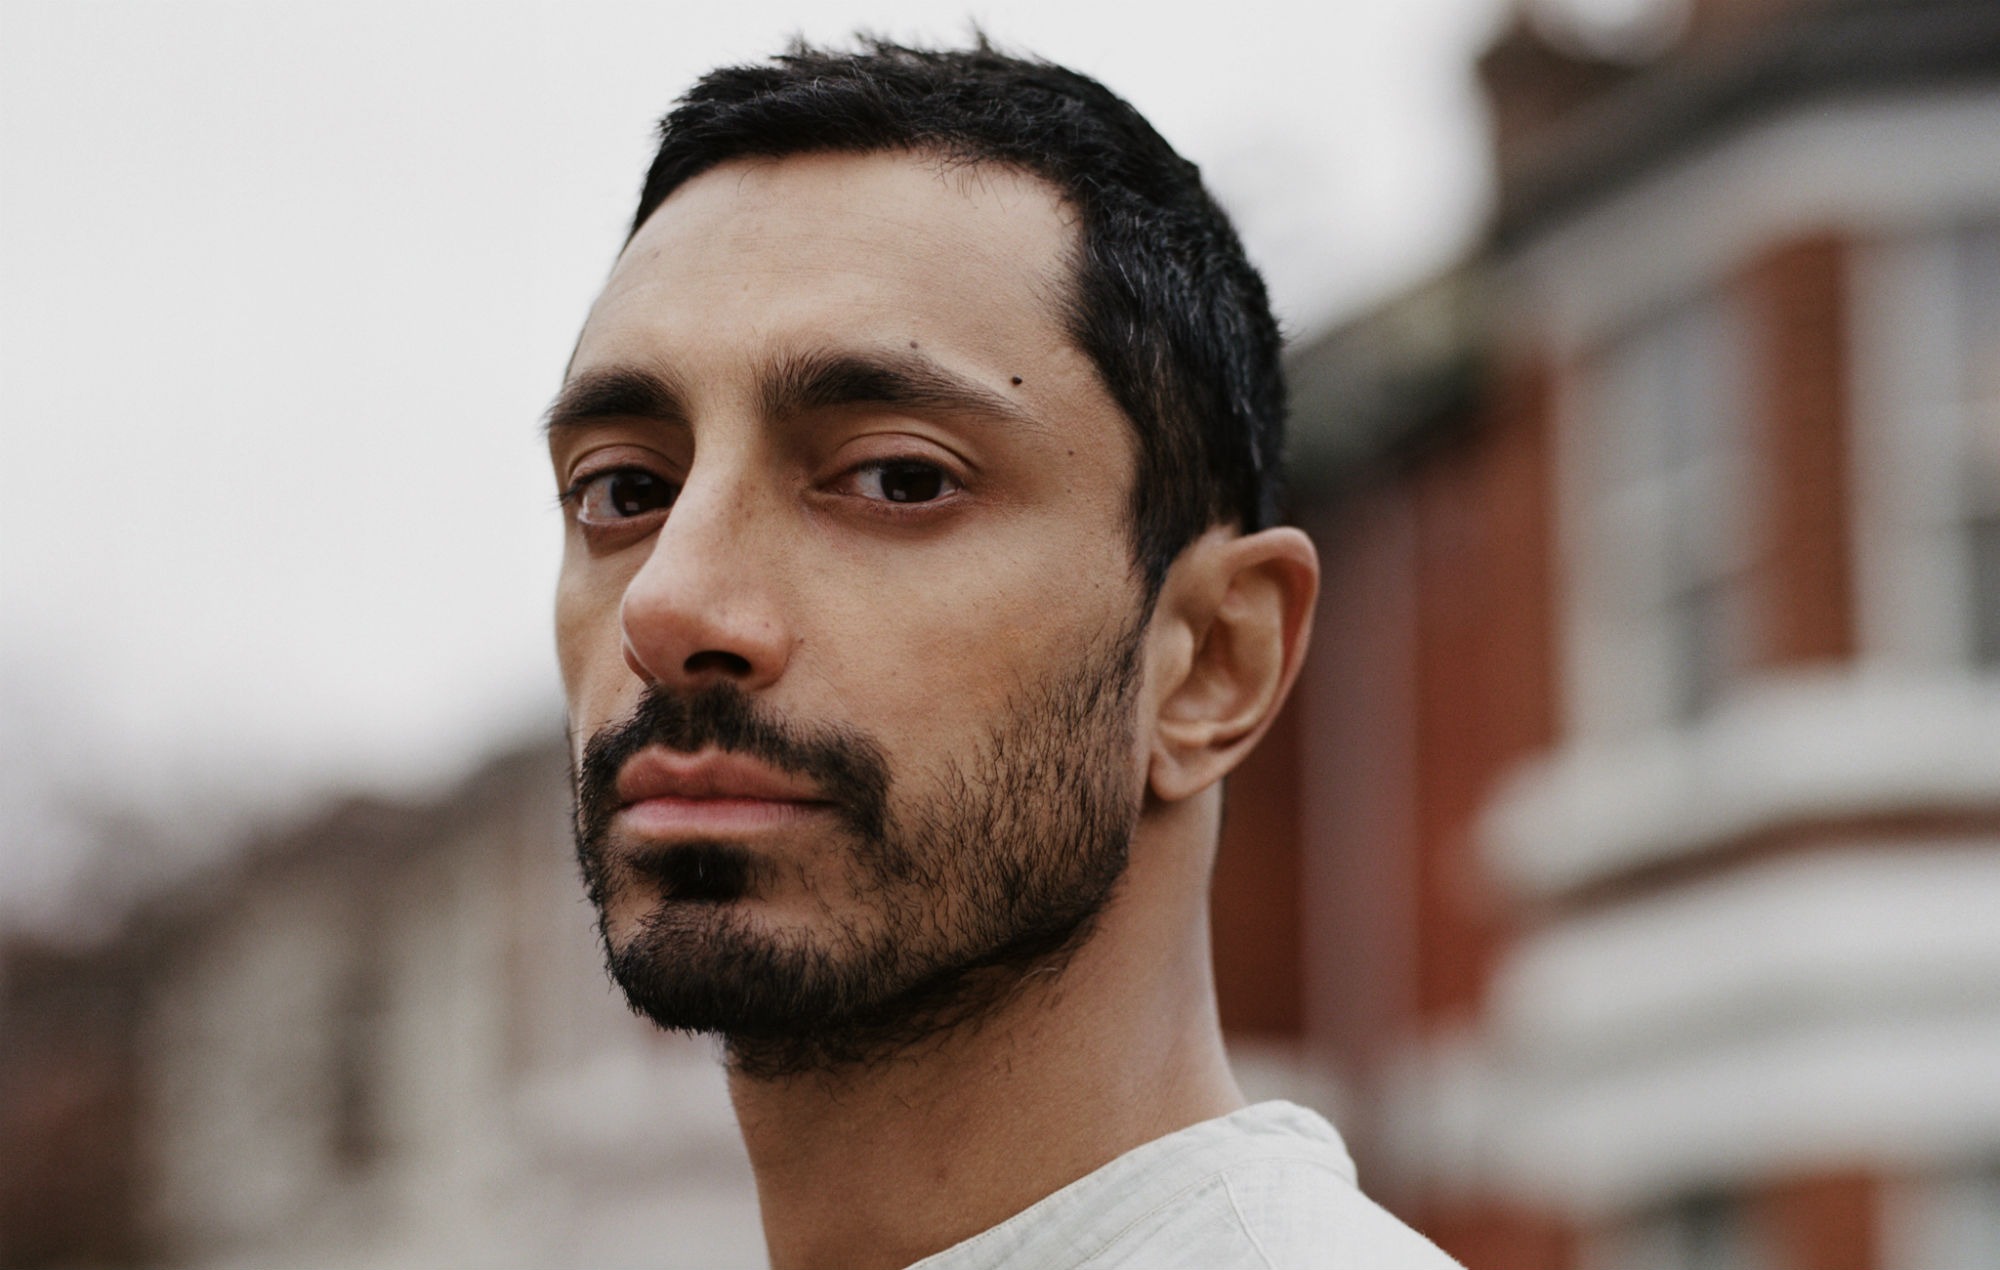 Riz Ahmed on being an actor, activist and rapper: “Representation stretches culture – it might even heal people”